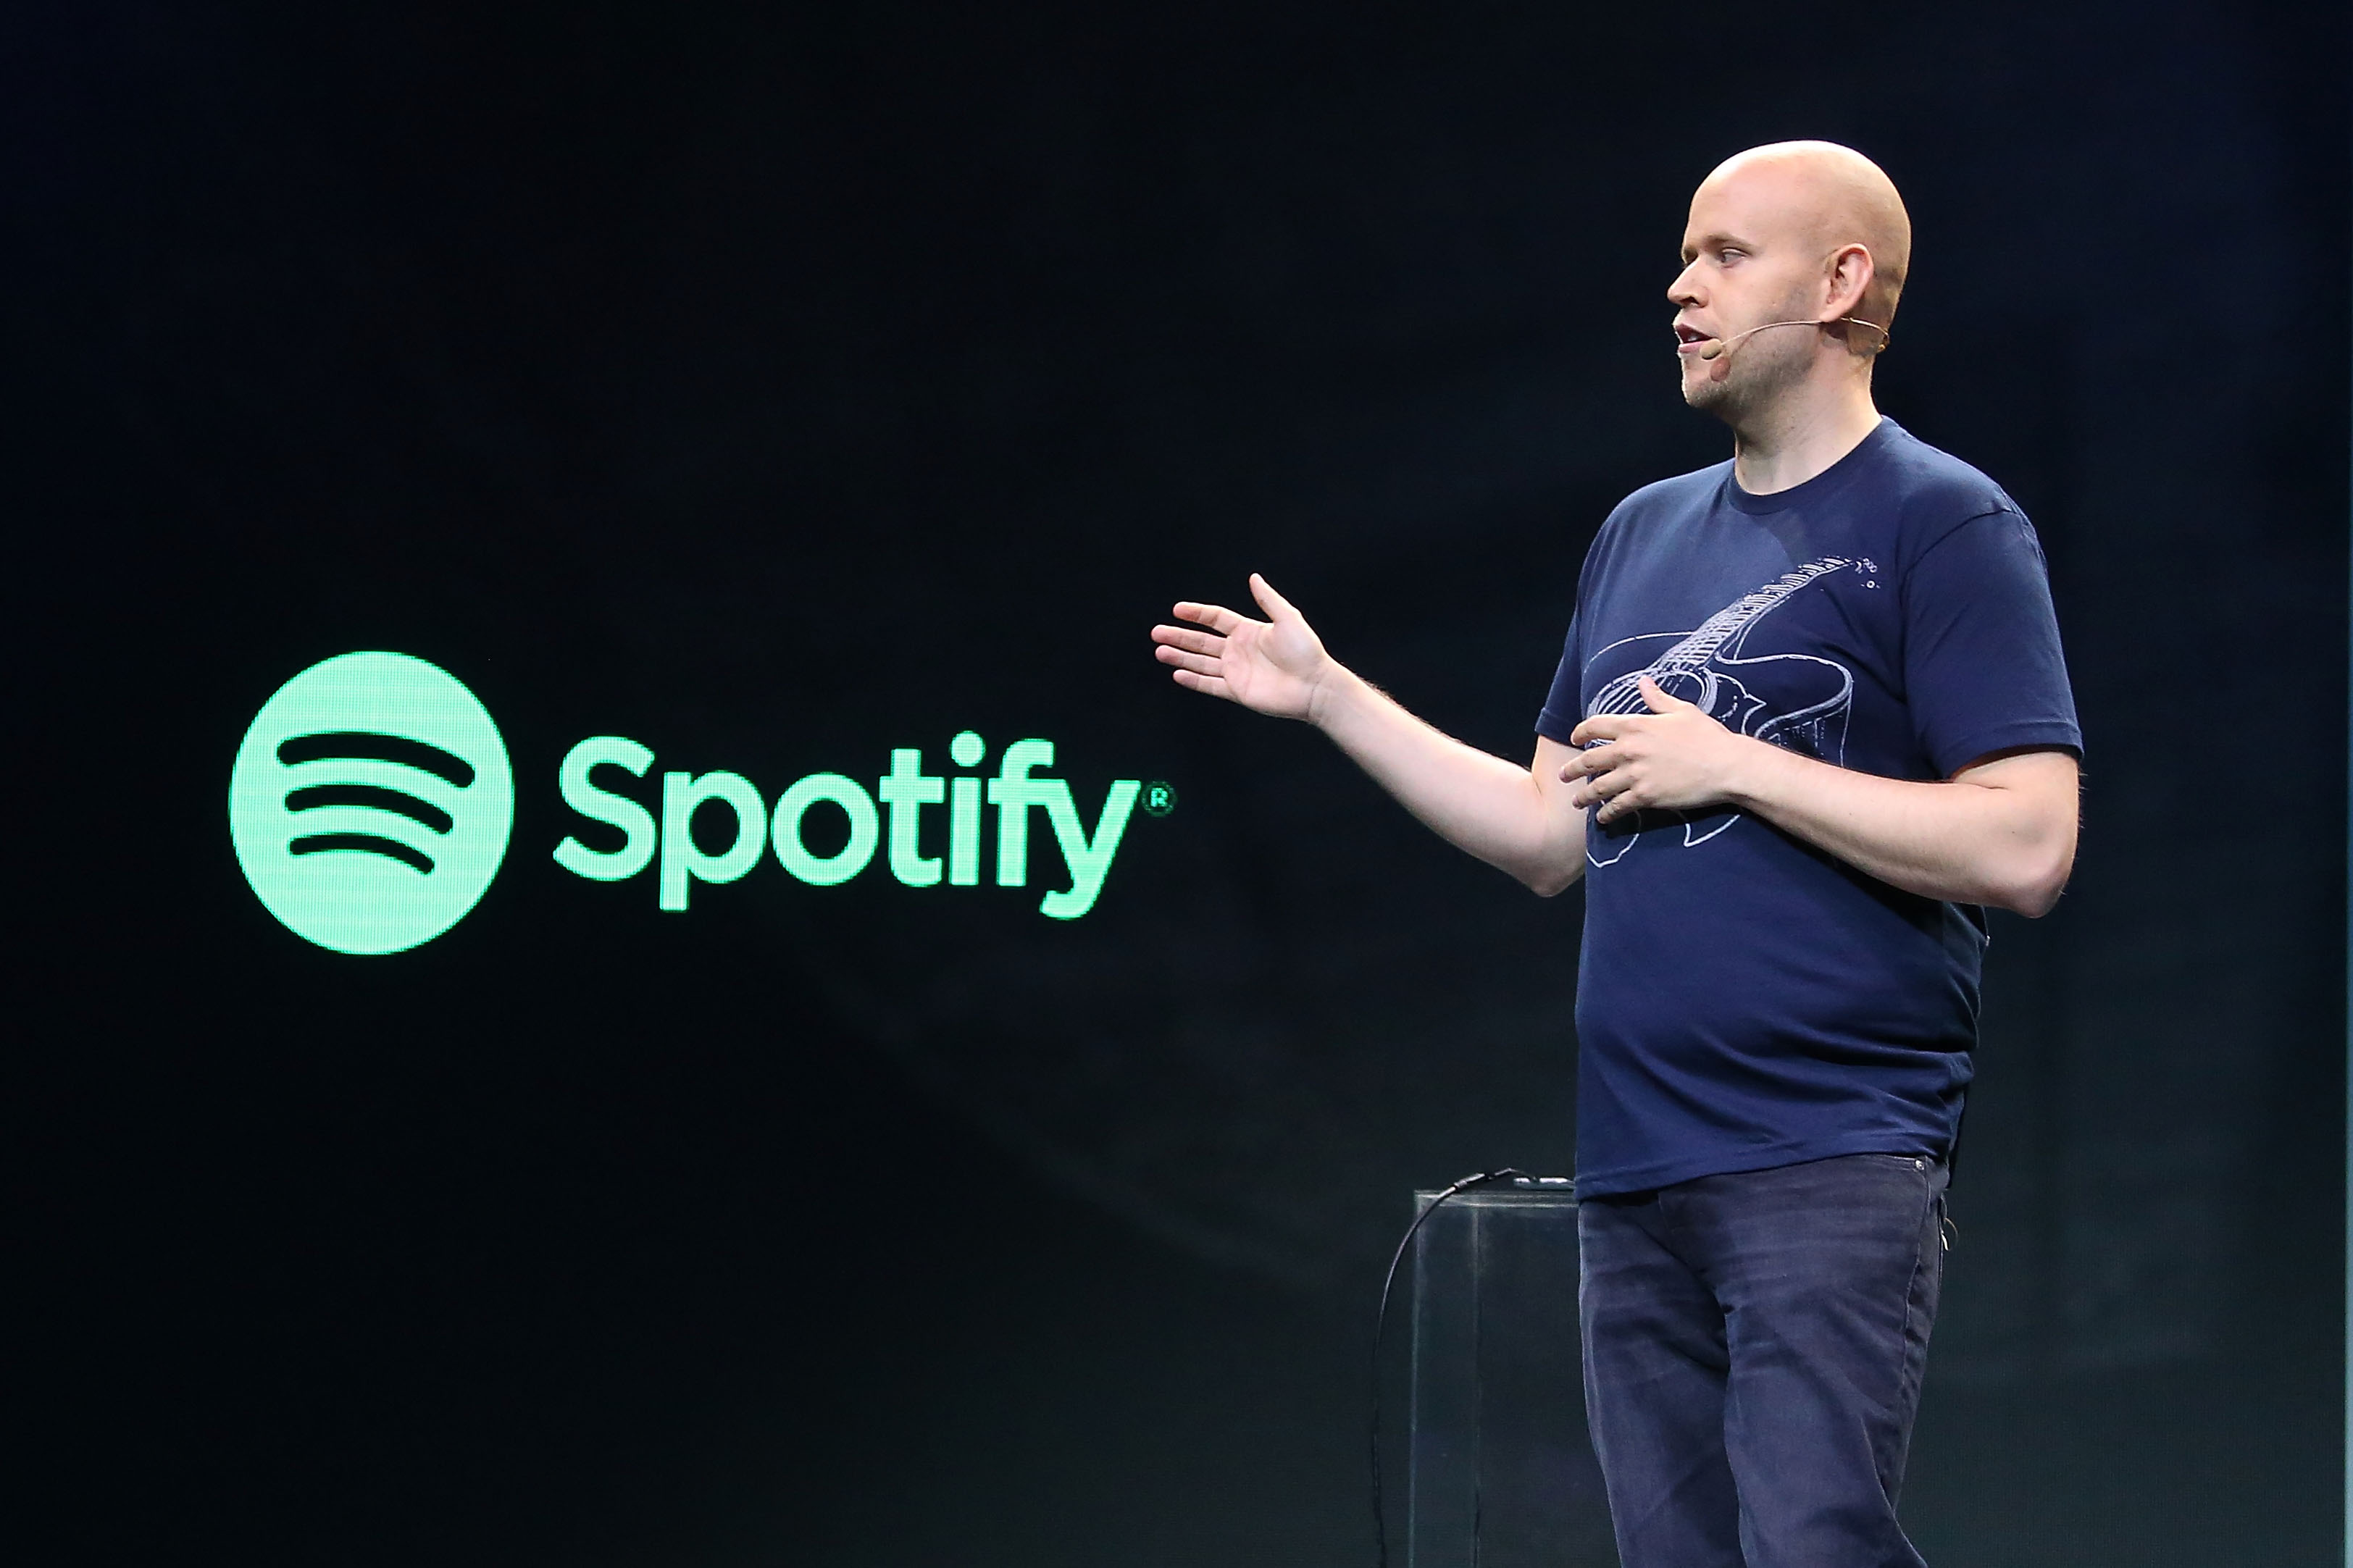 Spotify founder Daniel Ek speaks during the Spotify New Platform Launch at S.I.R. Studios on May 20, 2015 in New York City. (Taylor Hill—FilmMagic)